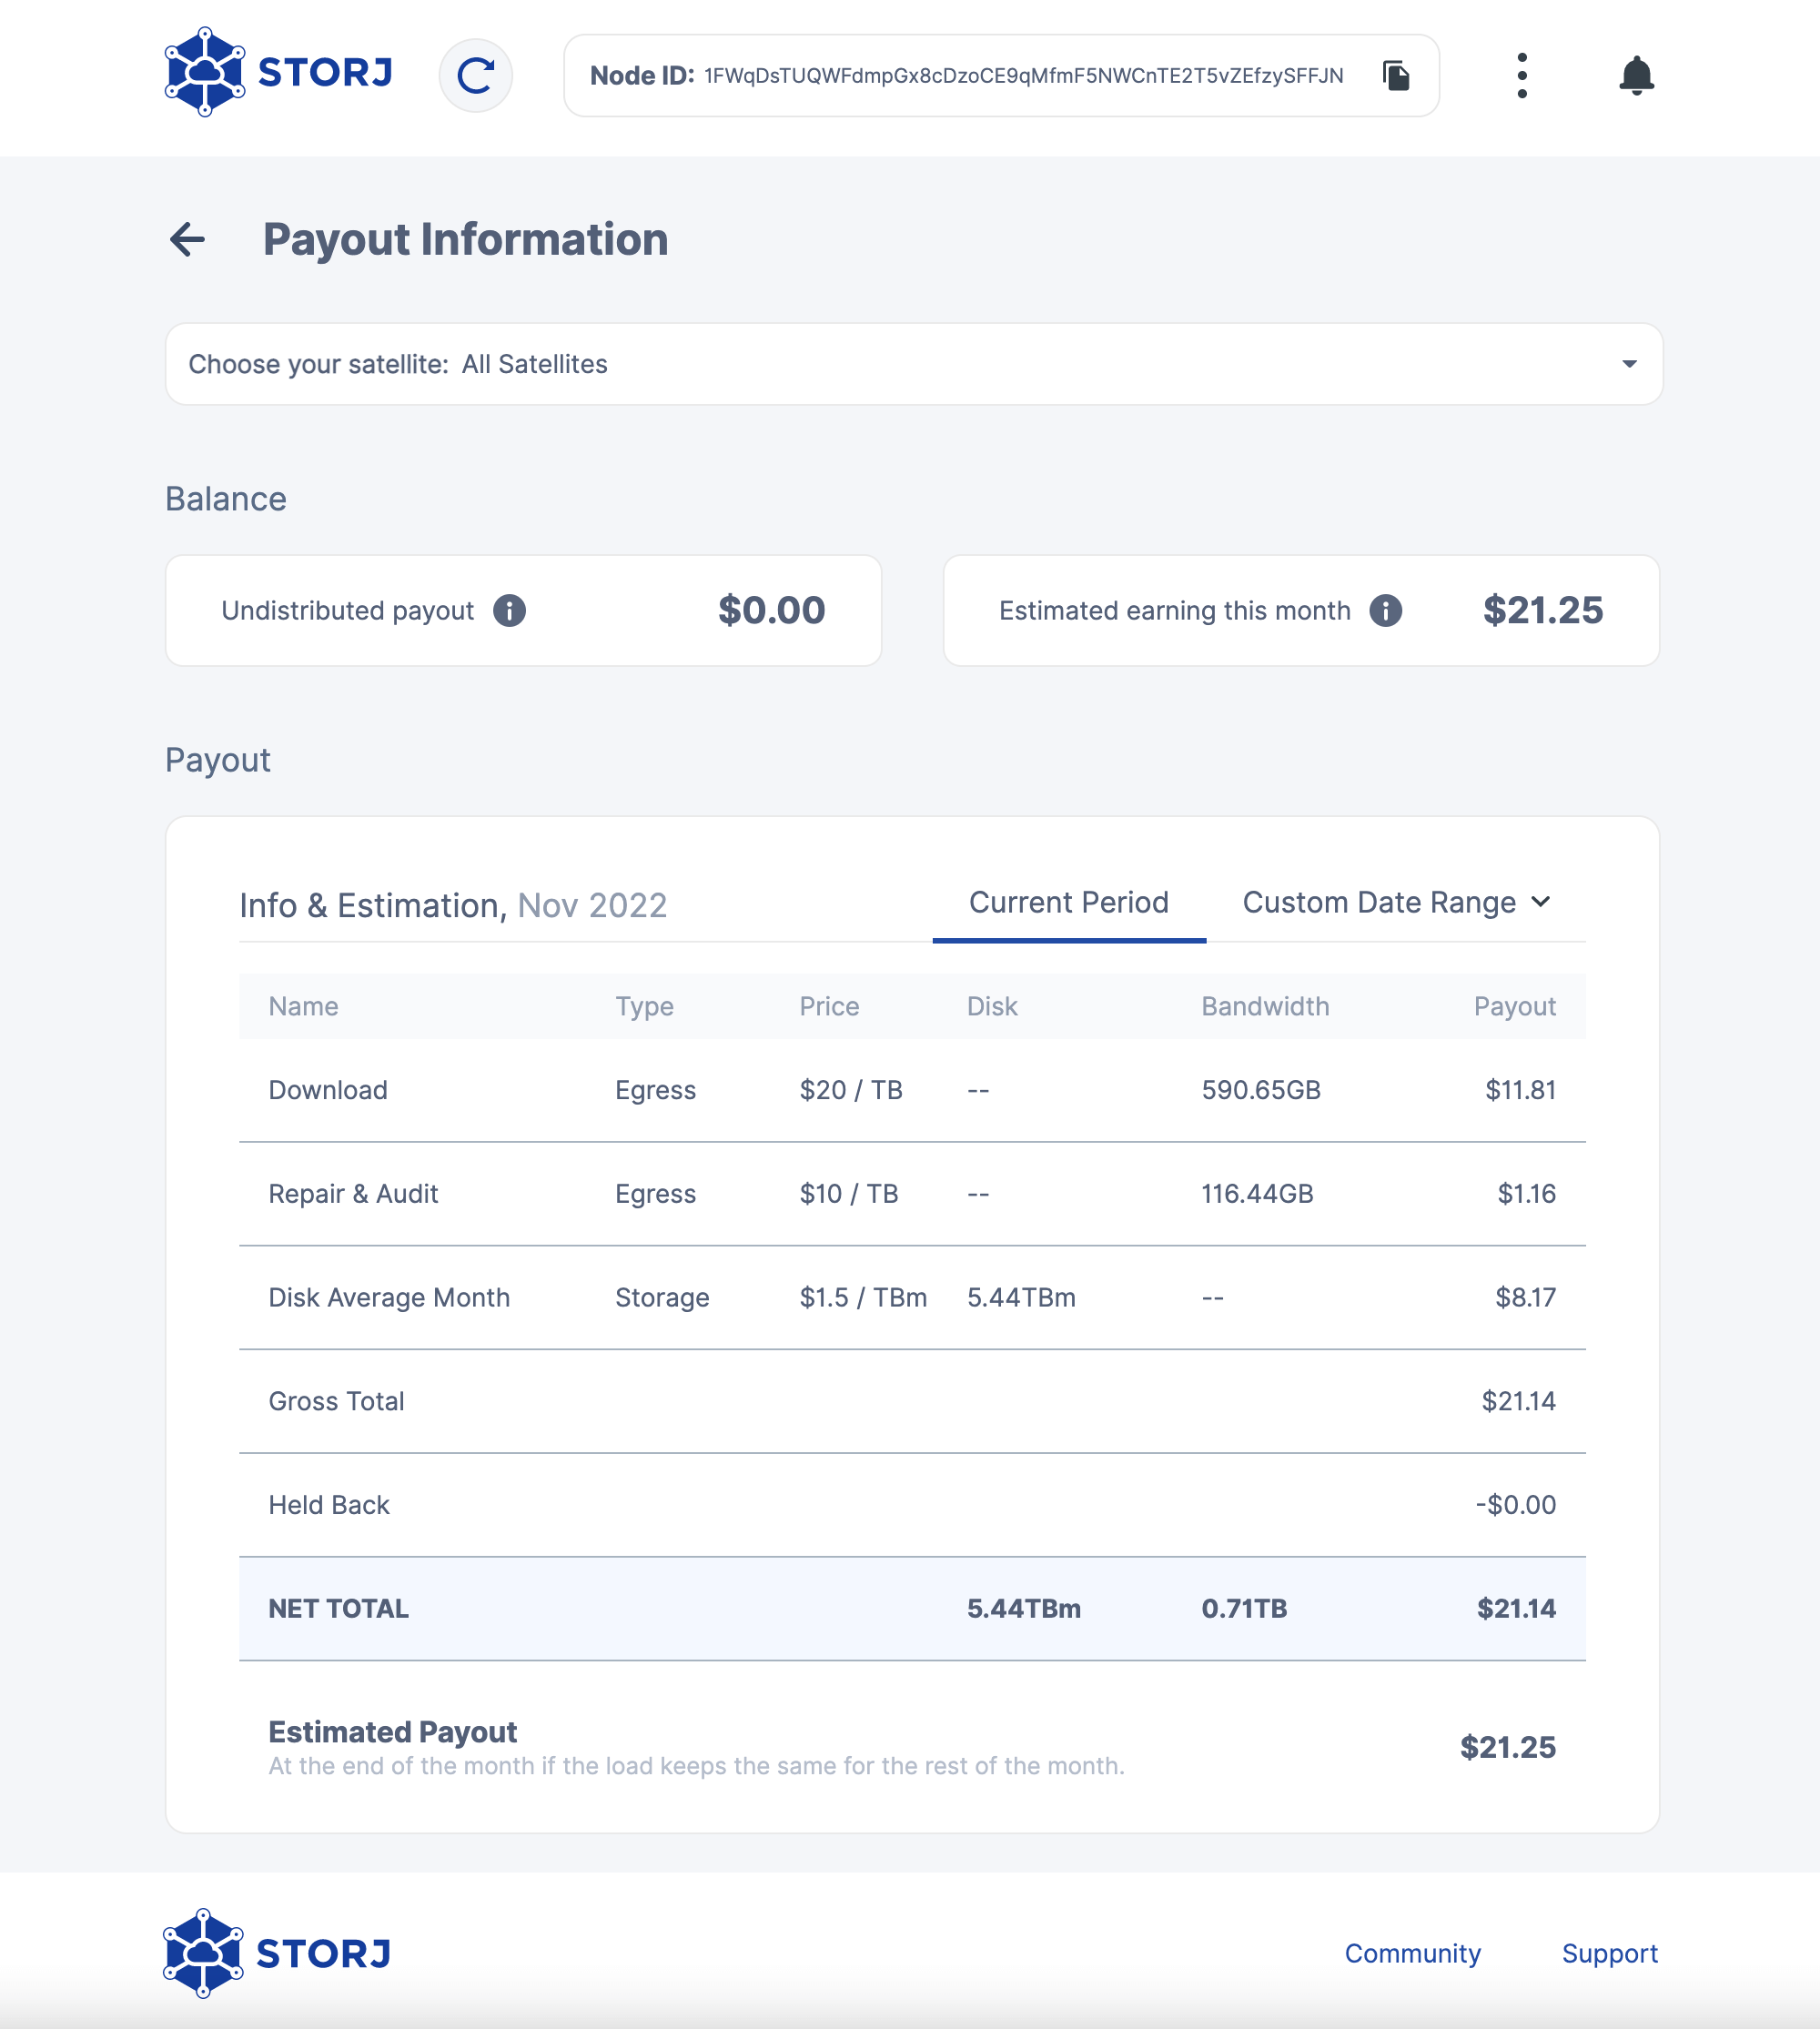 Storj Payout Information end of November 2022. Download Payout: $11.81, Repair & Audit Payout: $1.16, Disk Average Month Payout: $8.17, Net Total: $21.14, Estimated Payout: $21.25